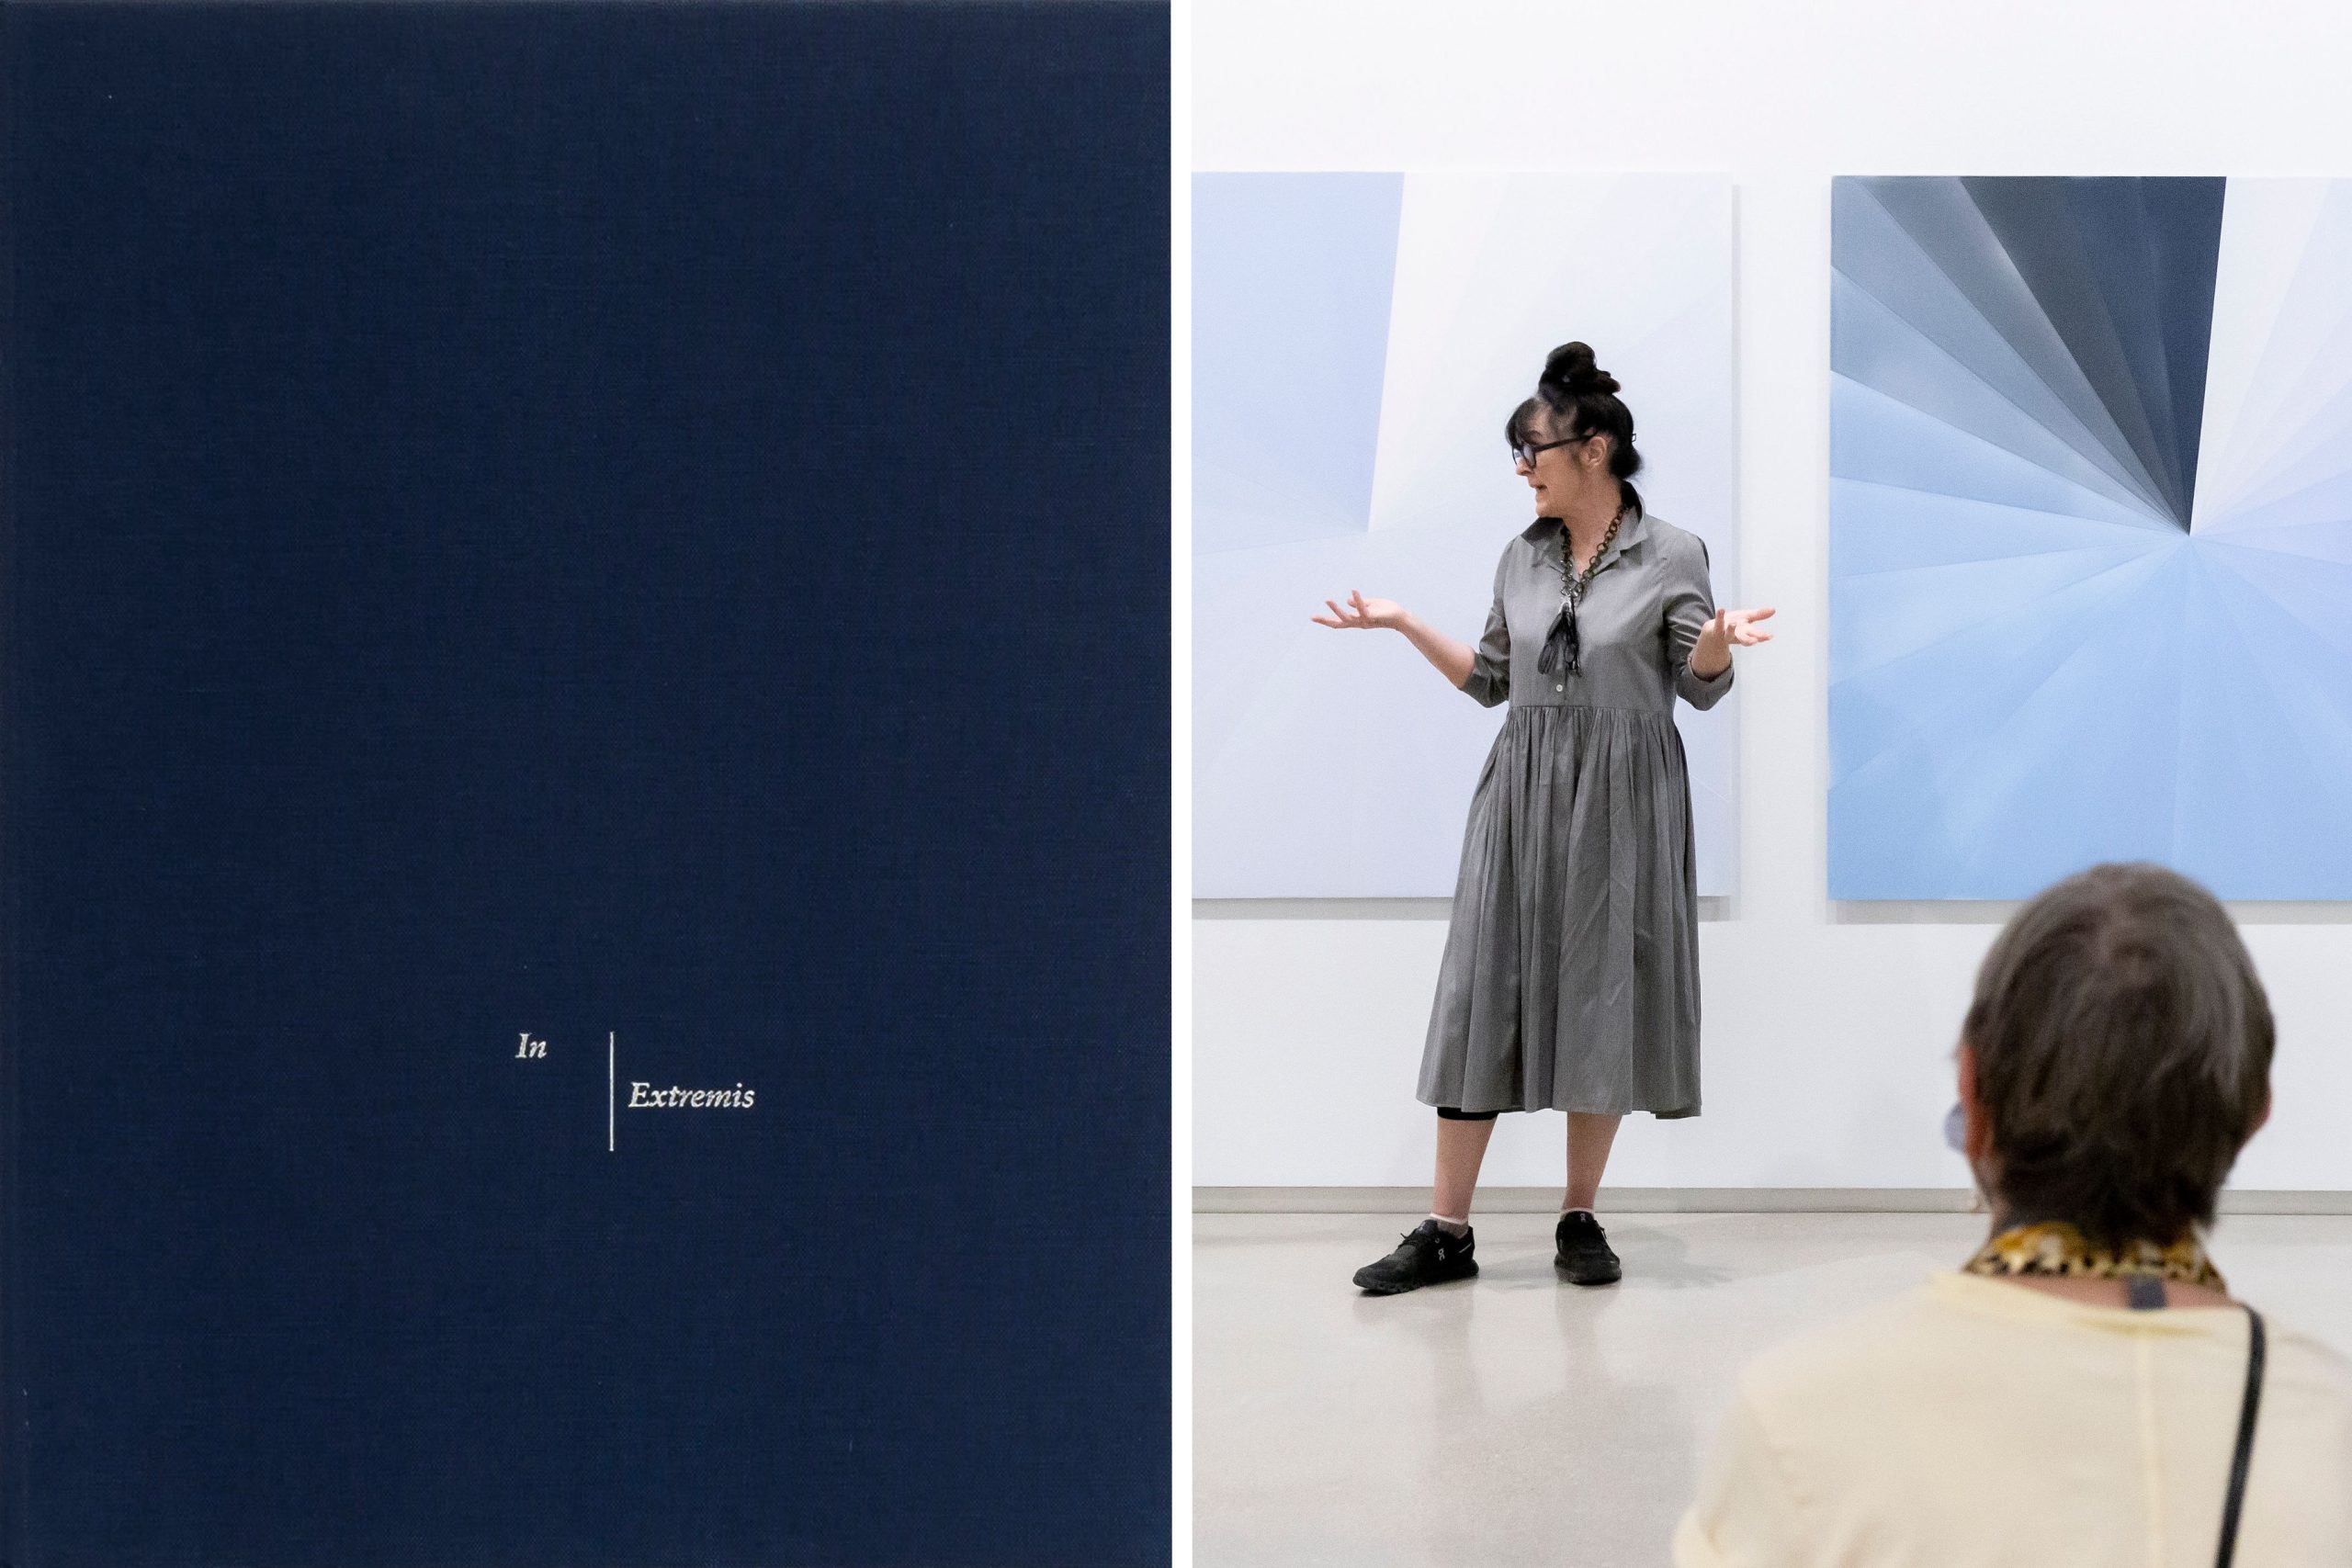 Left: In Extremis book cover. Right: Artist Marie Lannoo speaks in front of her paintings at an exhibition opening.